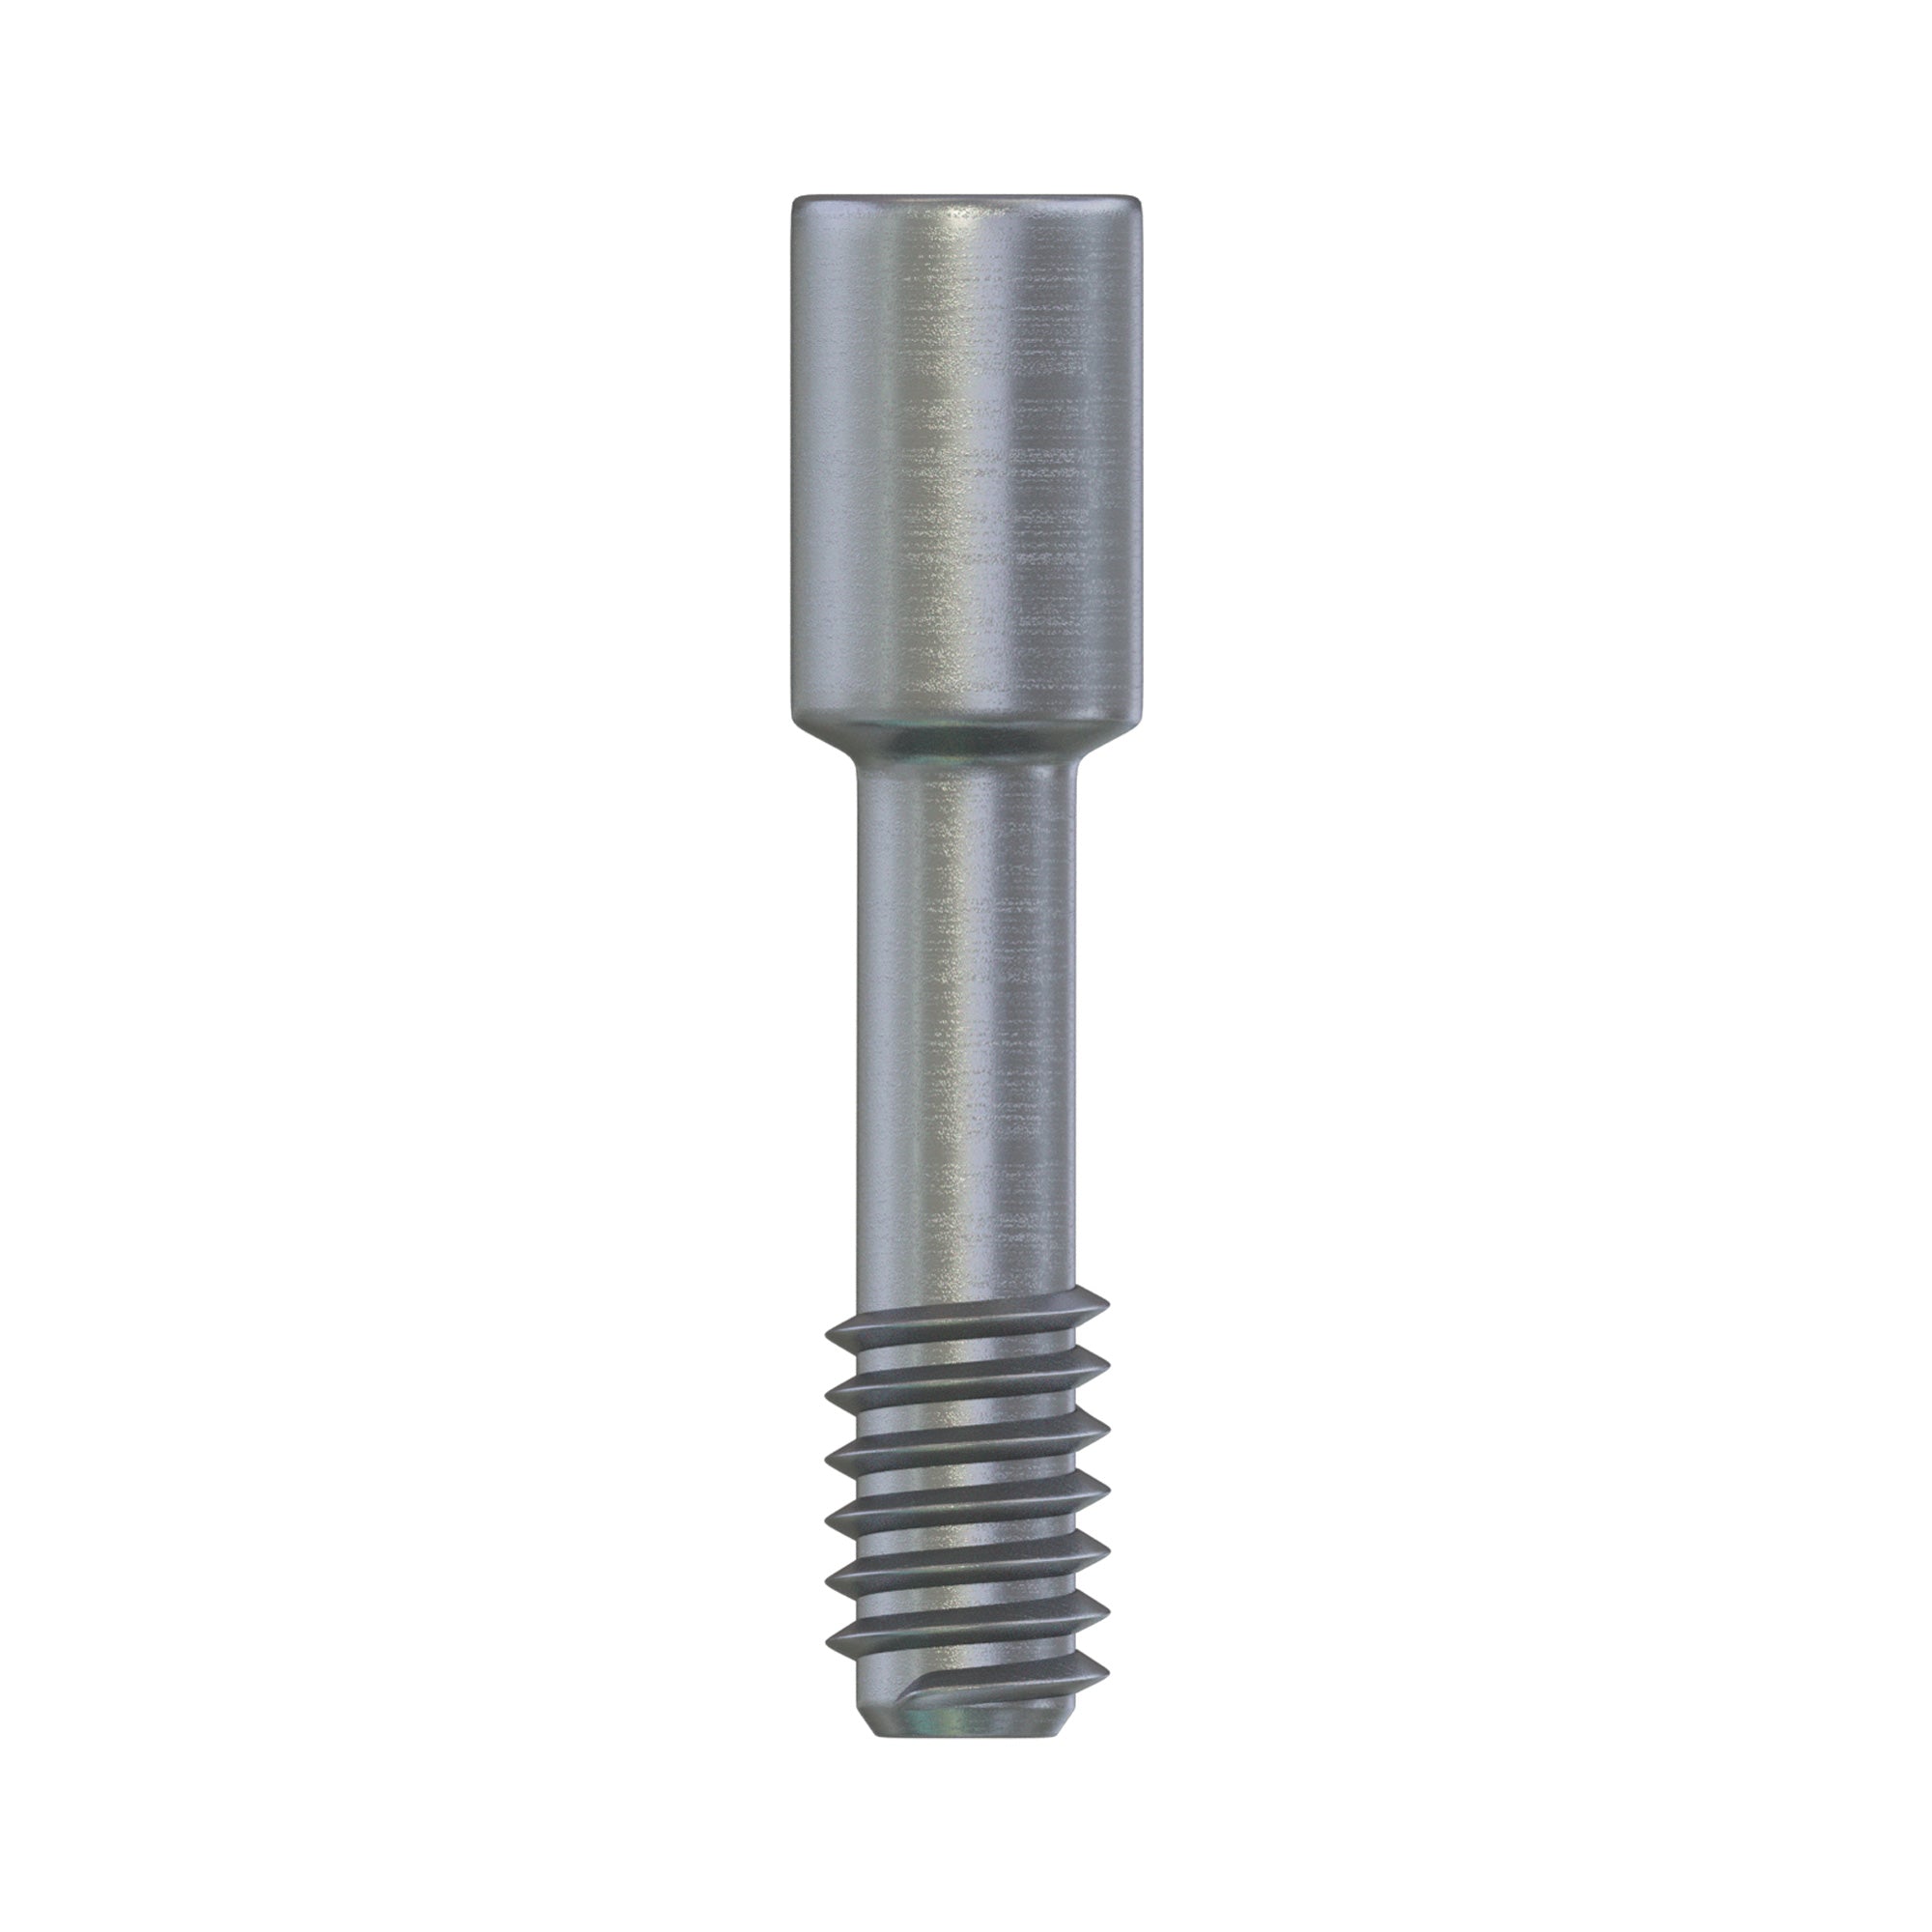 DSI Abutment Fixation Screw - Conical Connection Implant NP Ø3.5mm